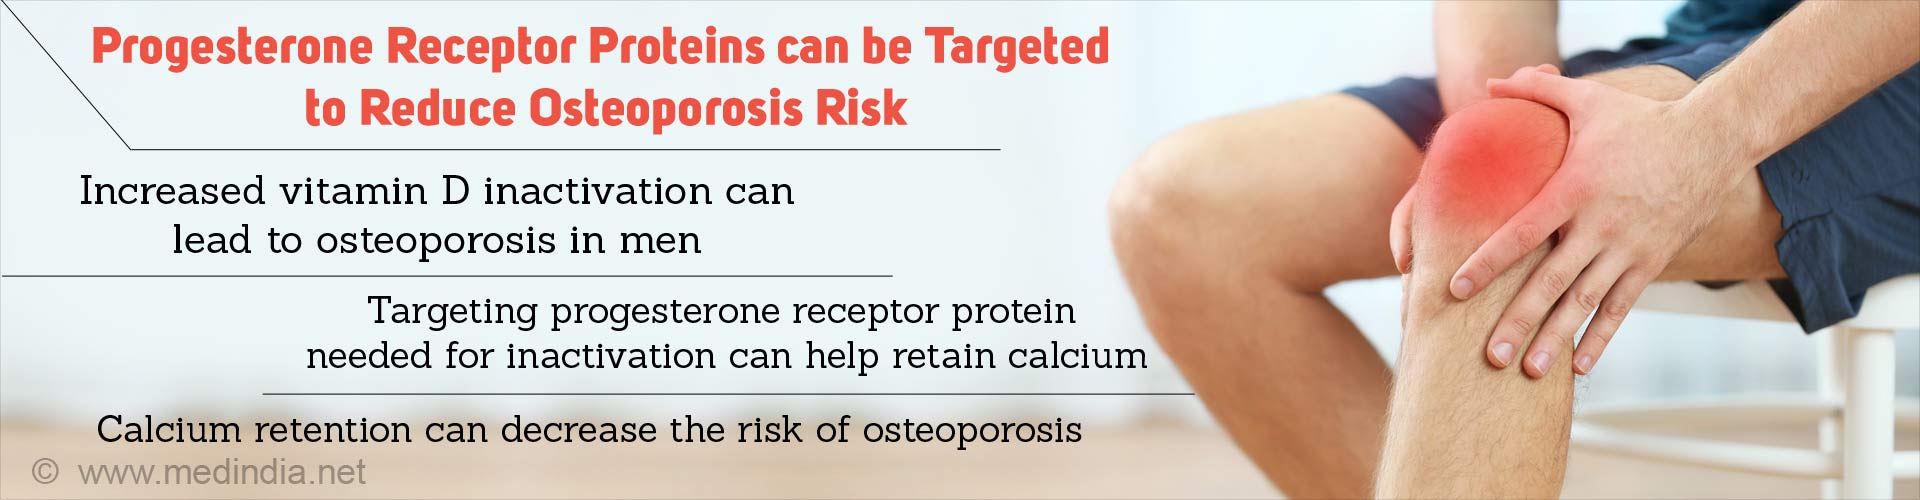 progesterone receptor proteins can be targeted to reduce osteoporosis risk
- increased vitamin D inactivation can lead to osteoporosis in men
- targeting progesterone receptor protein needed for inactivation can help retain calcium
- calcium retention can decrease the risk of osteoporosis